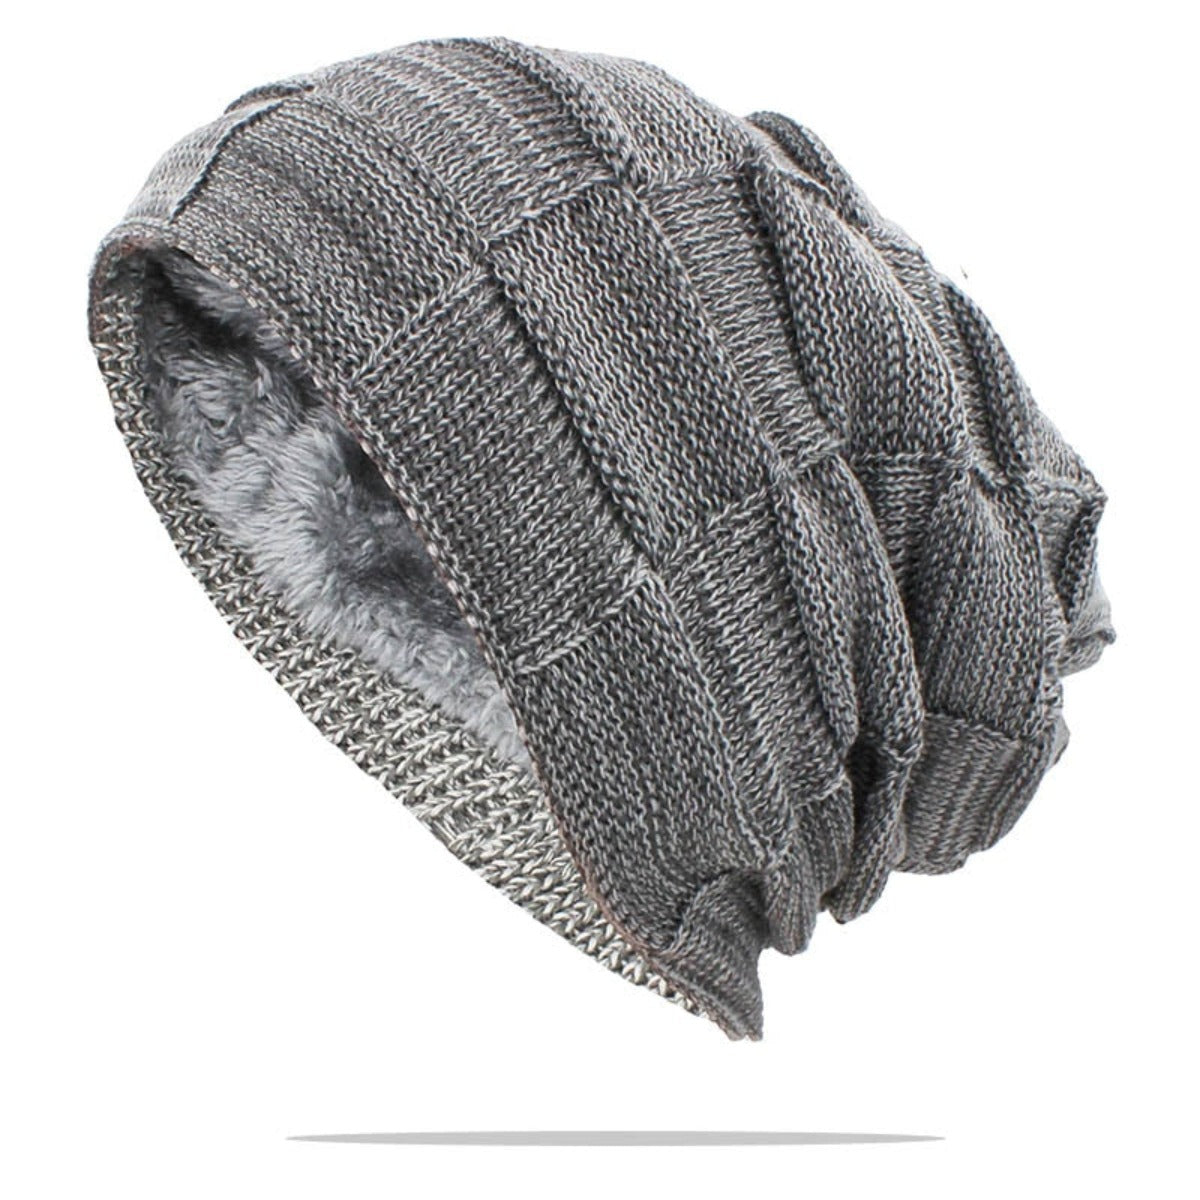 A high-quality Casual Winter Knitted Beanie Hat crafted with wool-knitted fabric and featuring a luxurious fur lining.